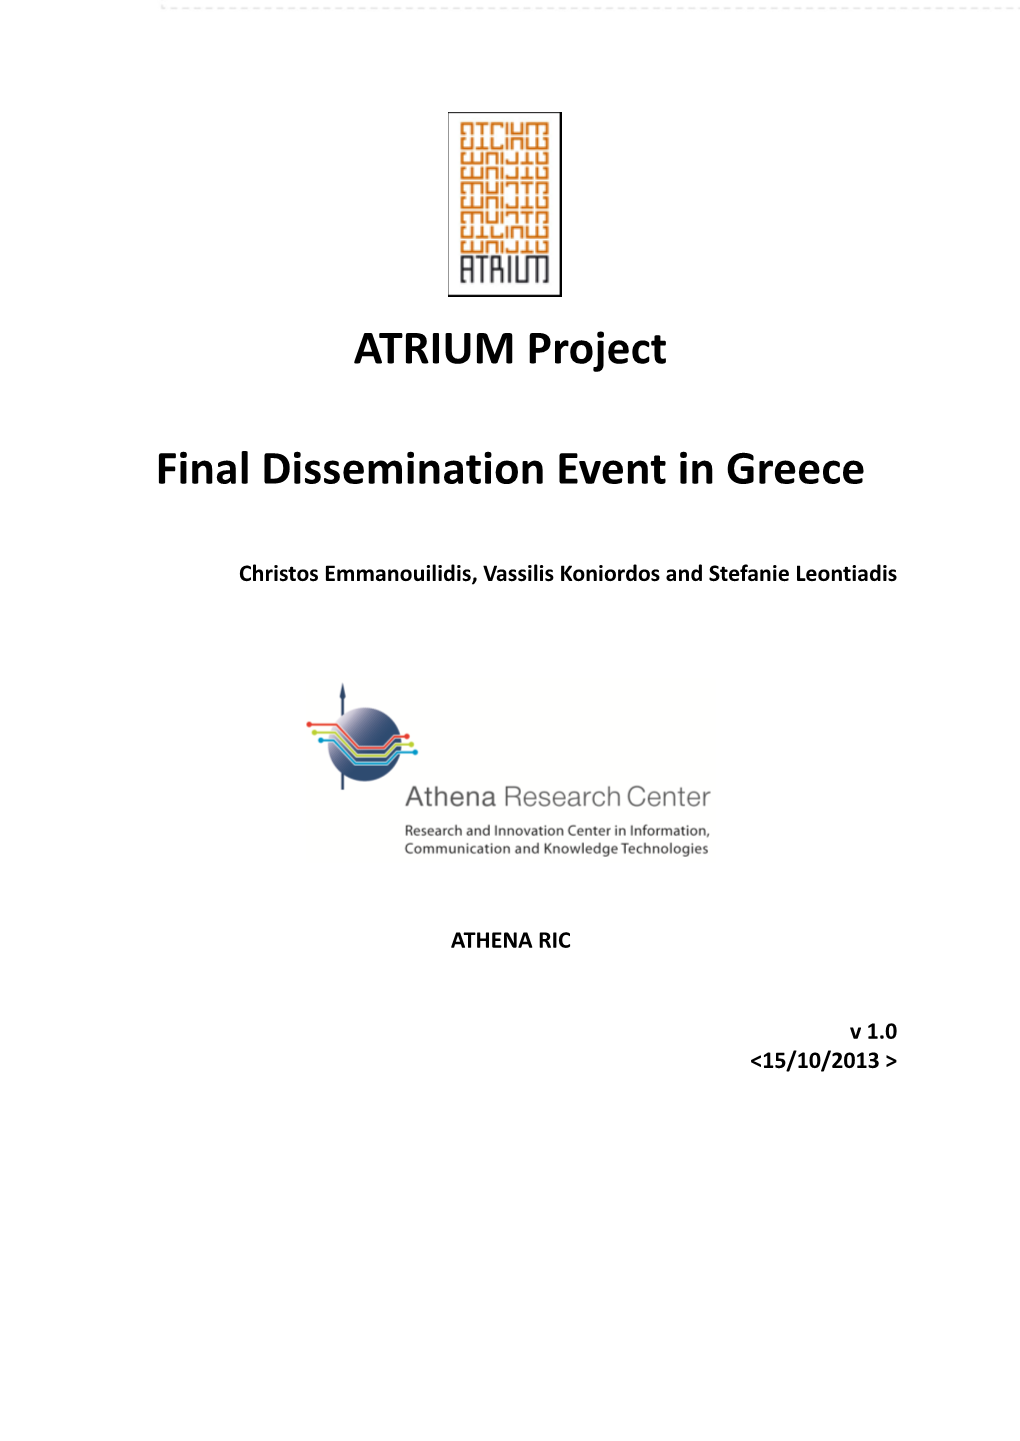 ATRIUM Project Final Dissemination Event in Greece